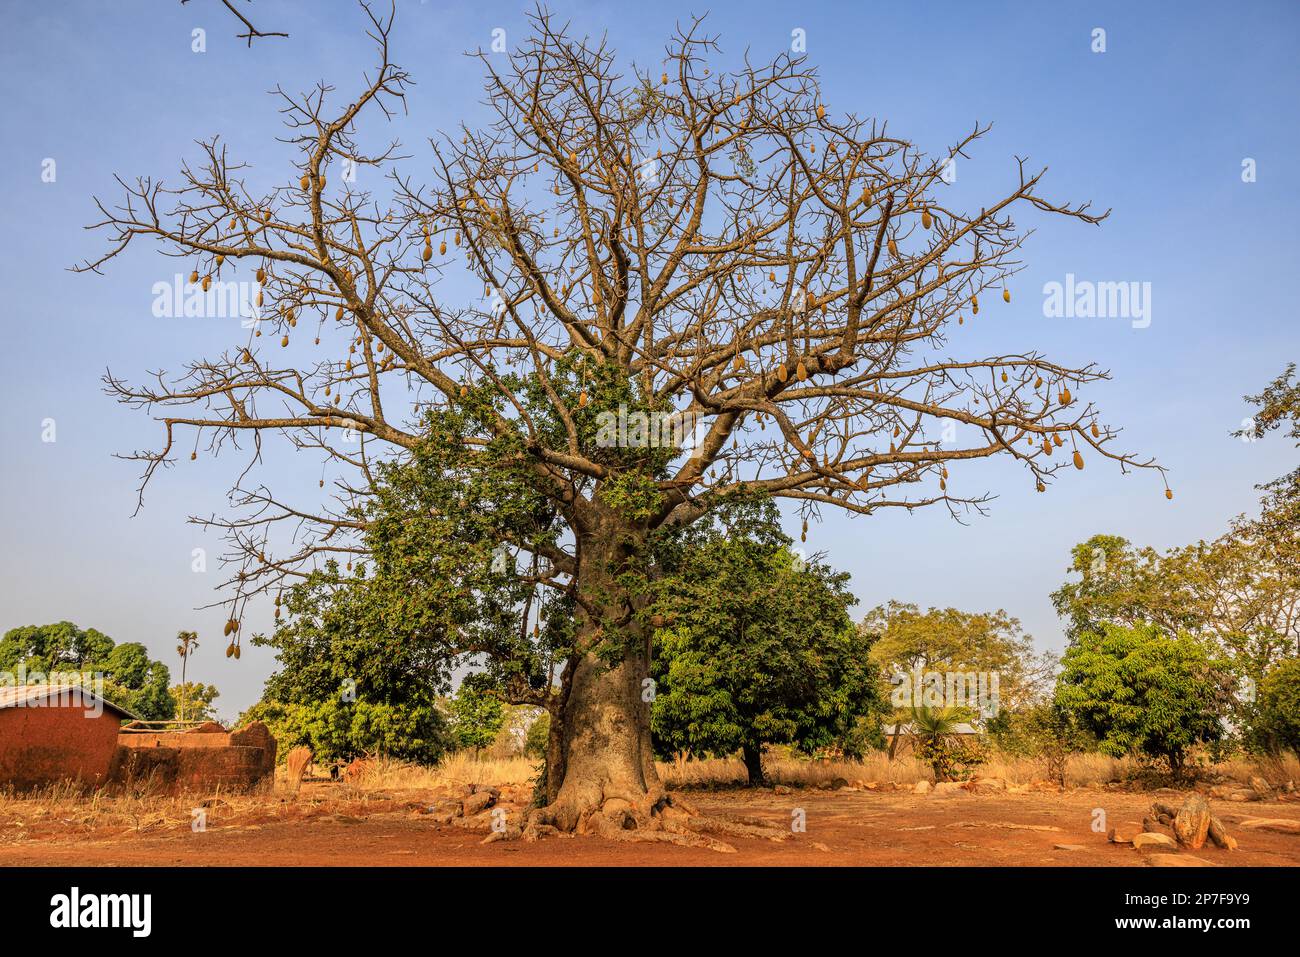 full photo of a large baobob tree with hanging fruit in a rural village in north west benin Stock Photo